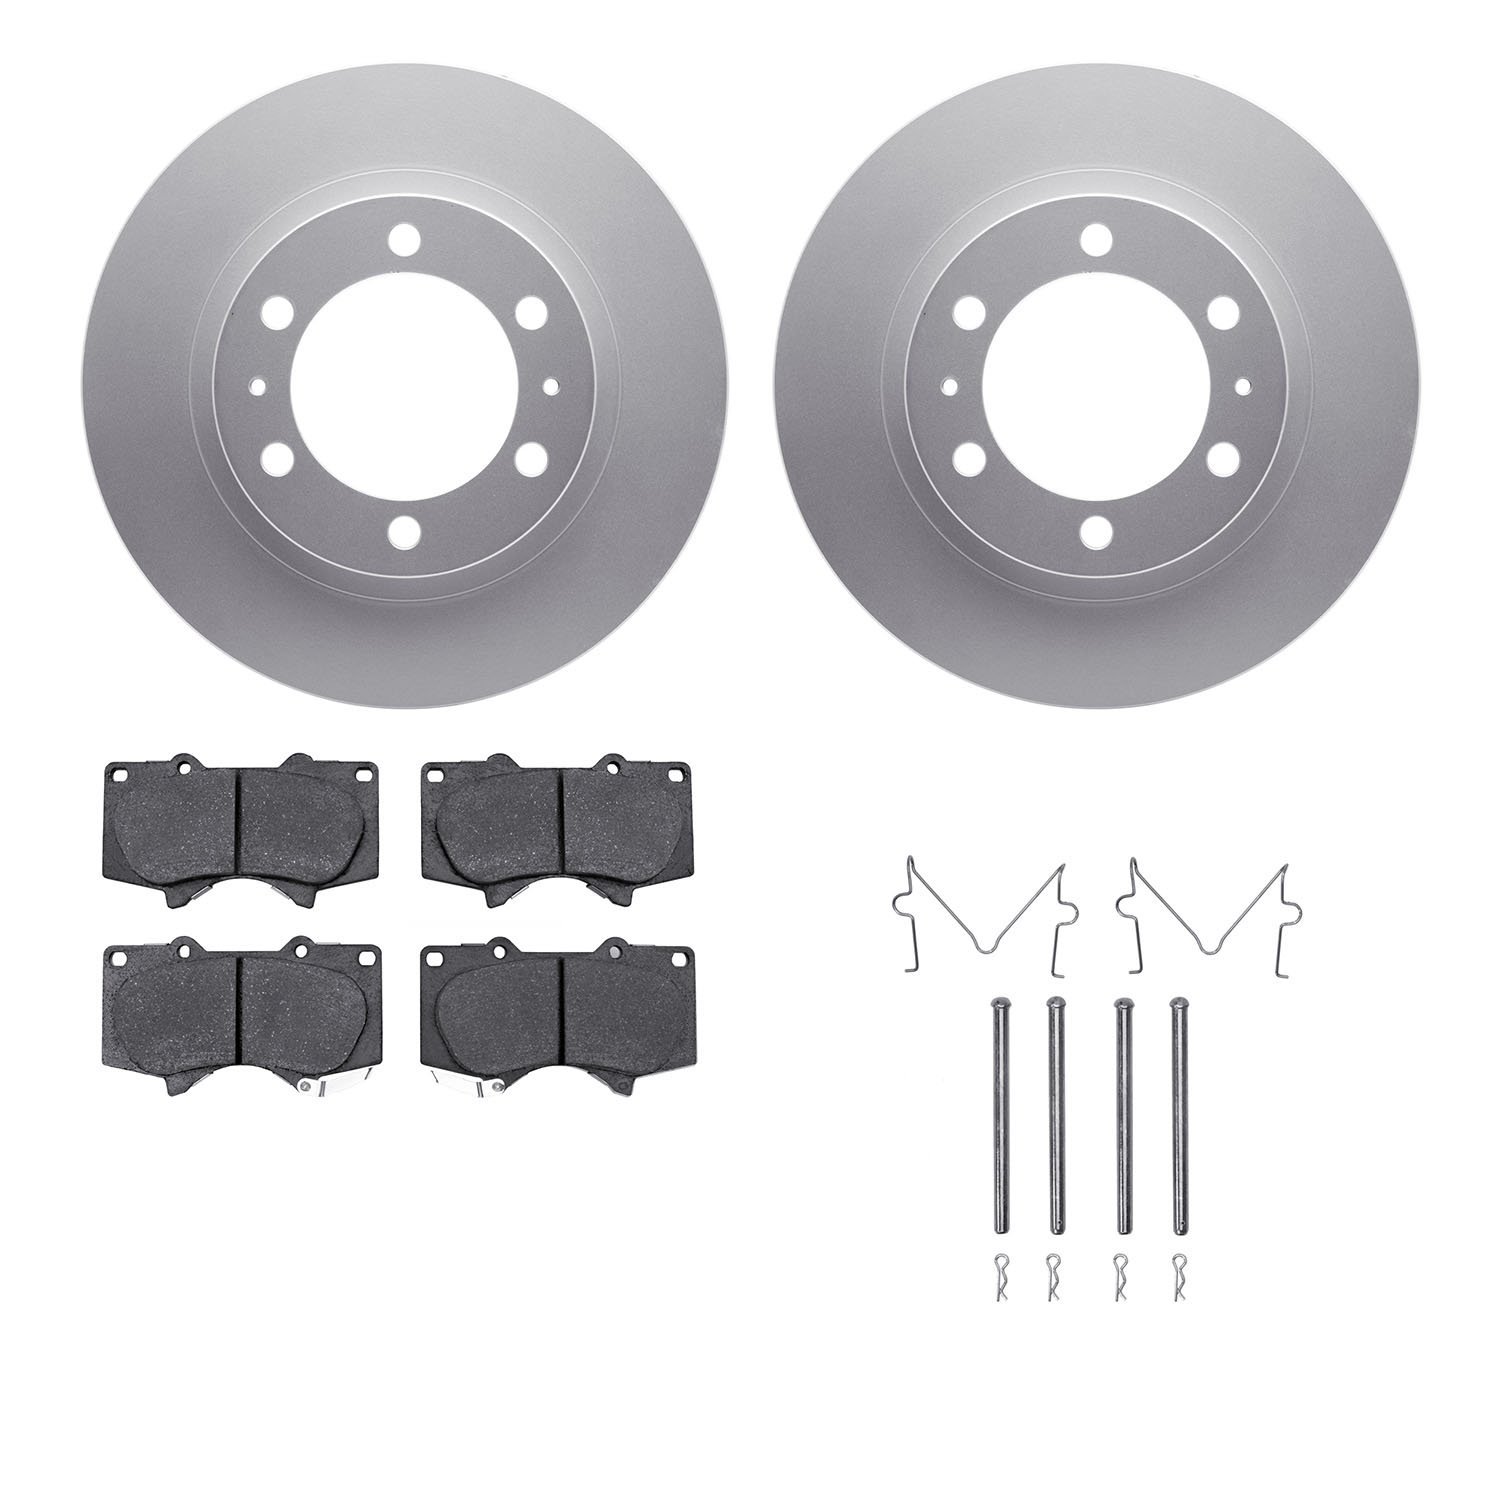 4412-76011 Geospec Brake Rotors with Ultimate-Duty Brake Pads & Hardware, Fits Select Lexus/Toyota/Scion, Position: Front